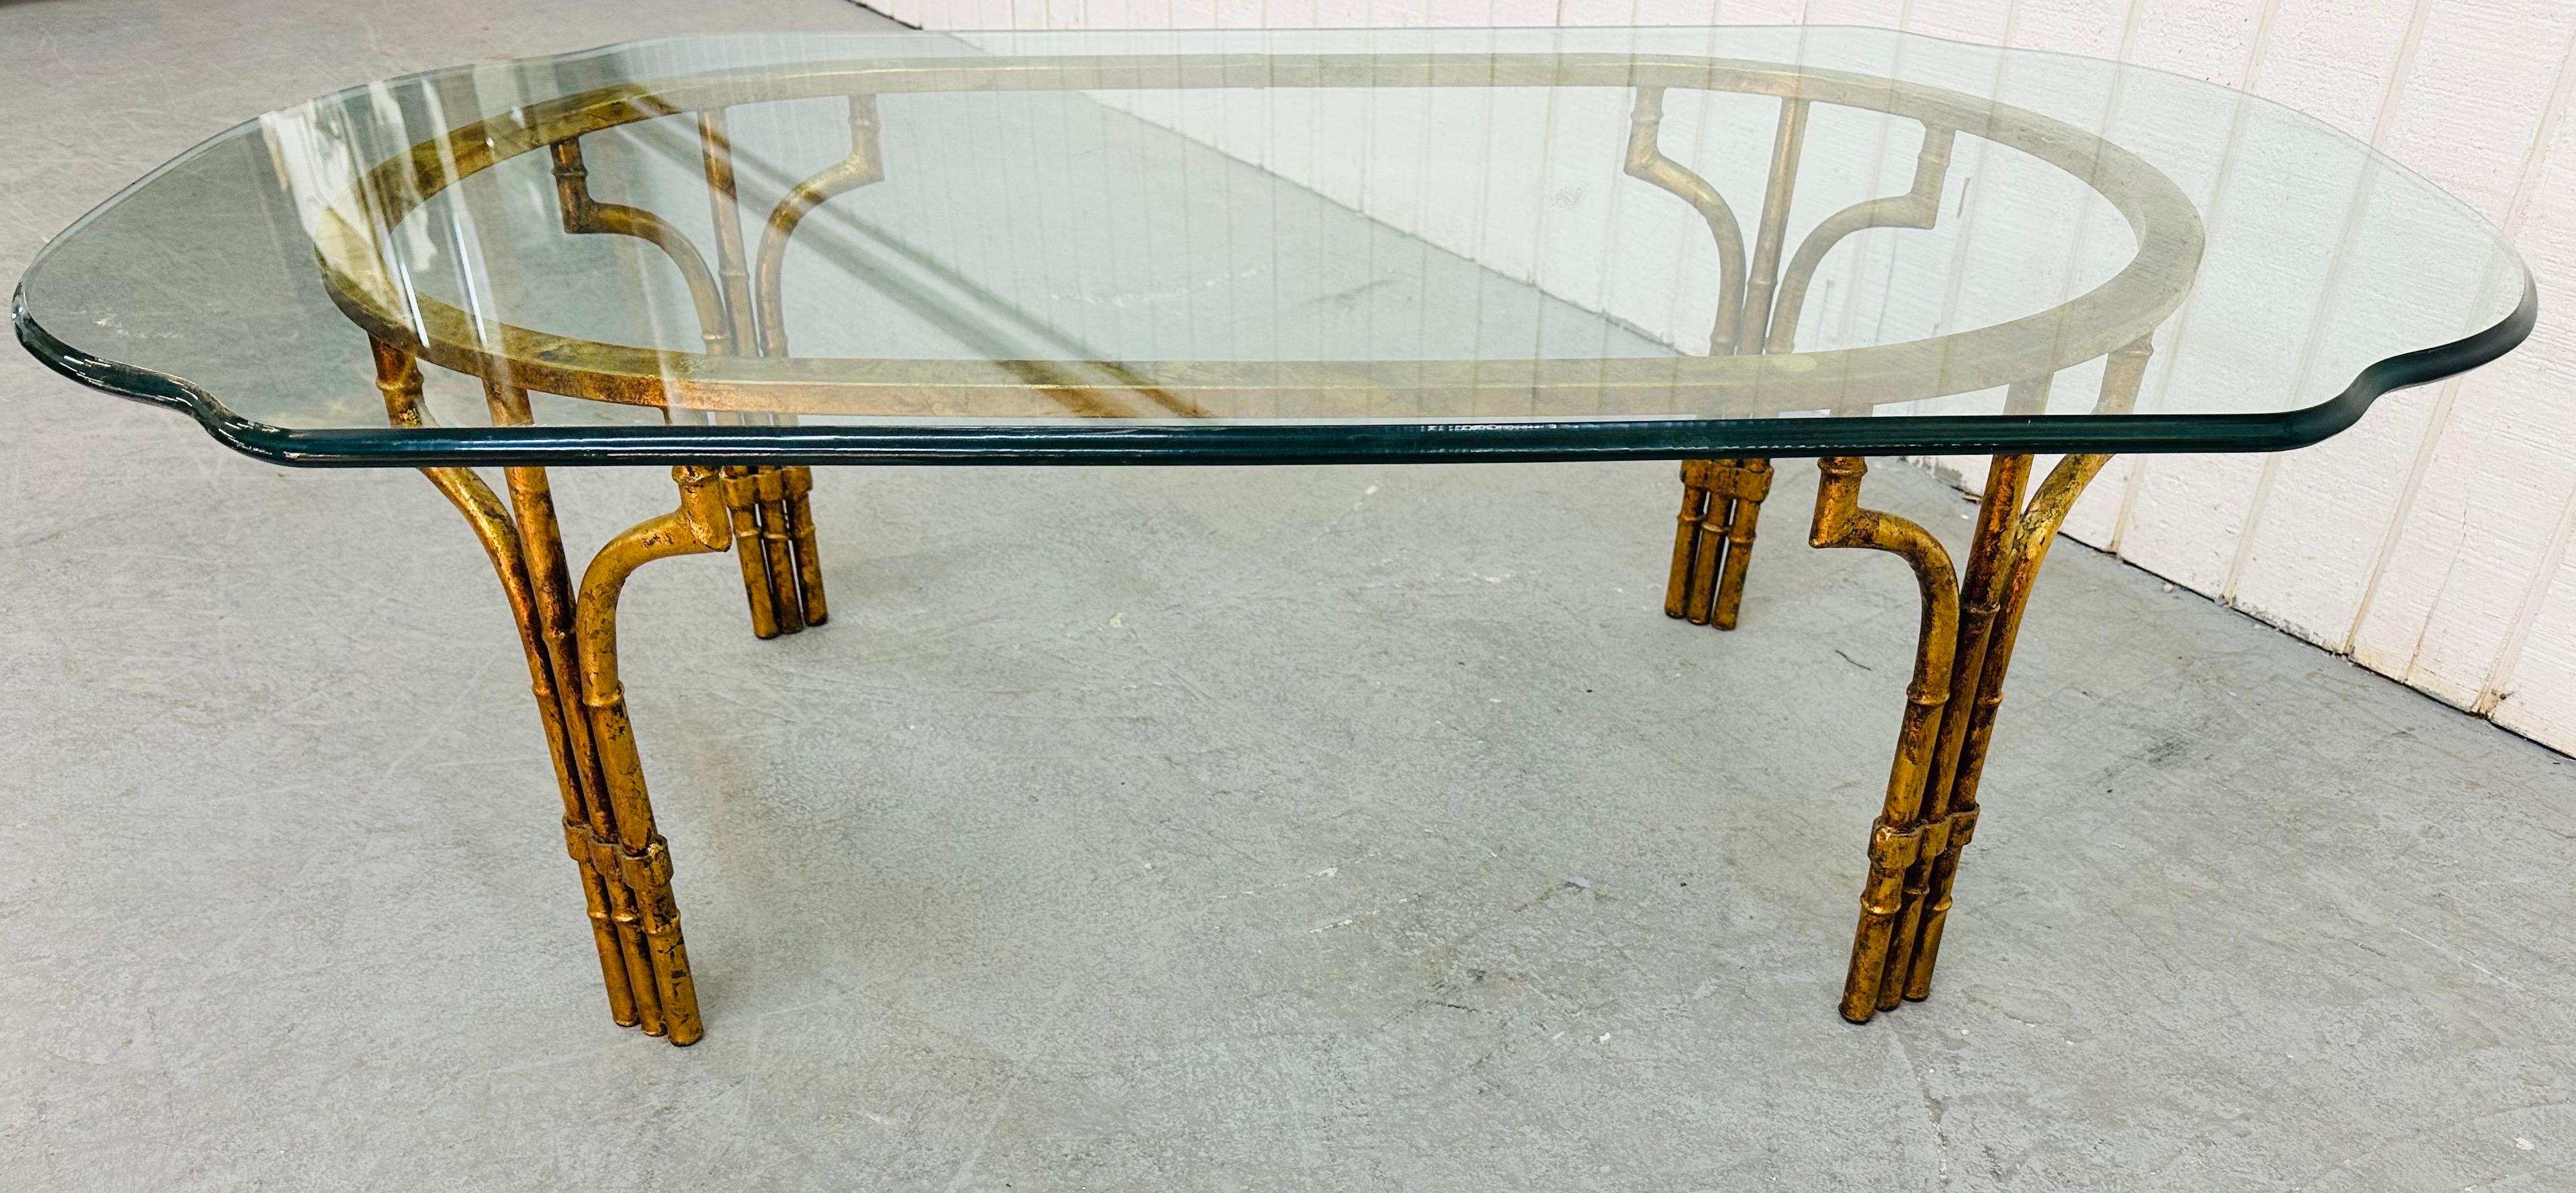 This listing is for a vintage Mastercraft Style Faux Bamboo Glass Top Coffee Table. Featuring a turtle shell shaped glass top, oval gold gilt faux bamboo base and four legs.